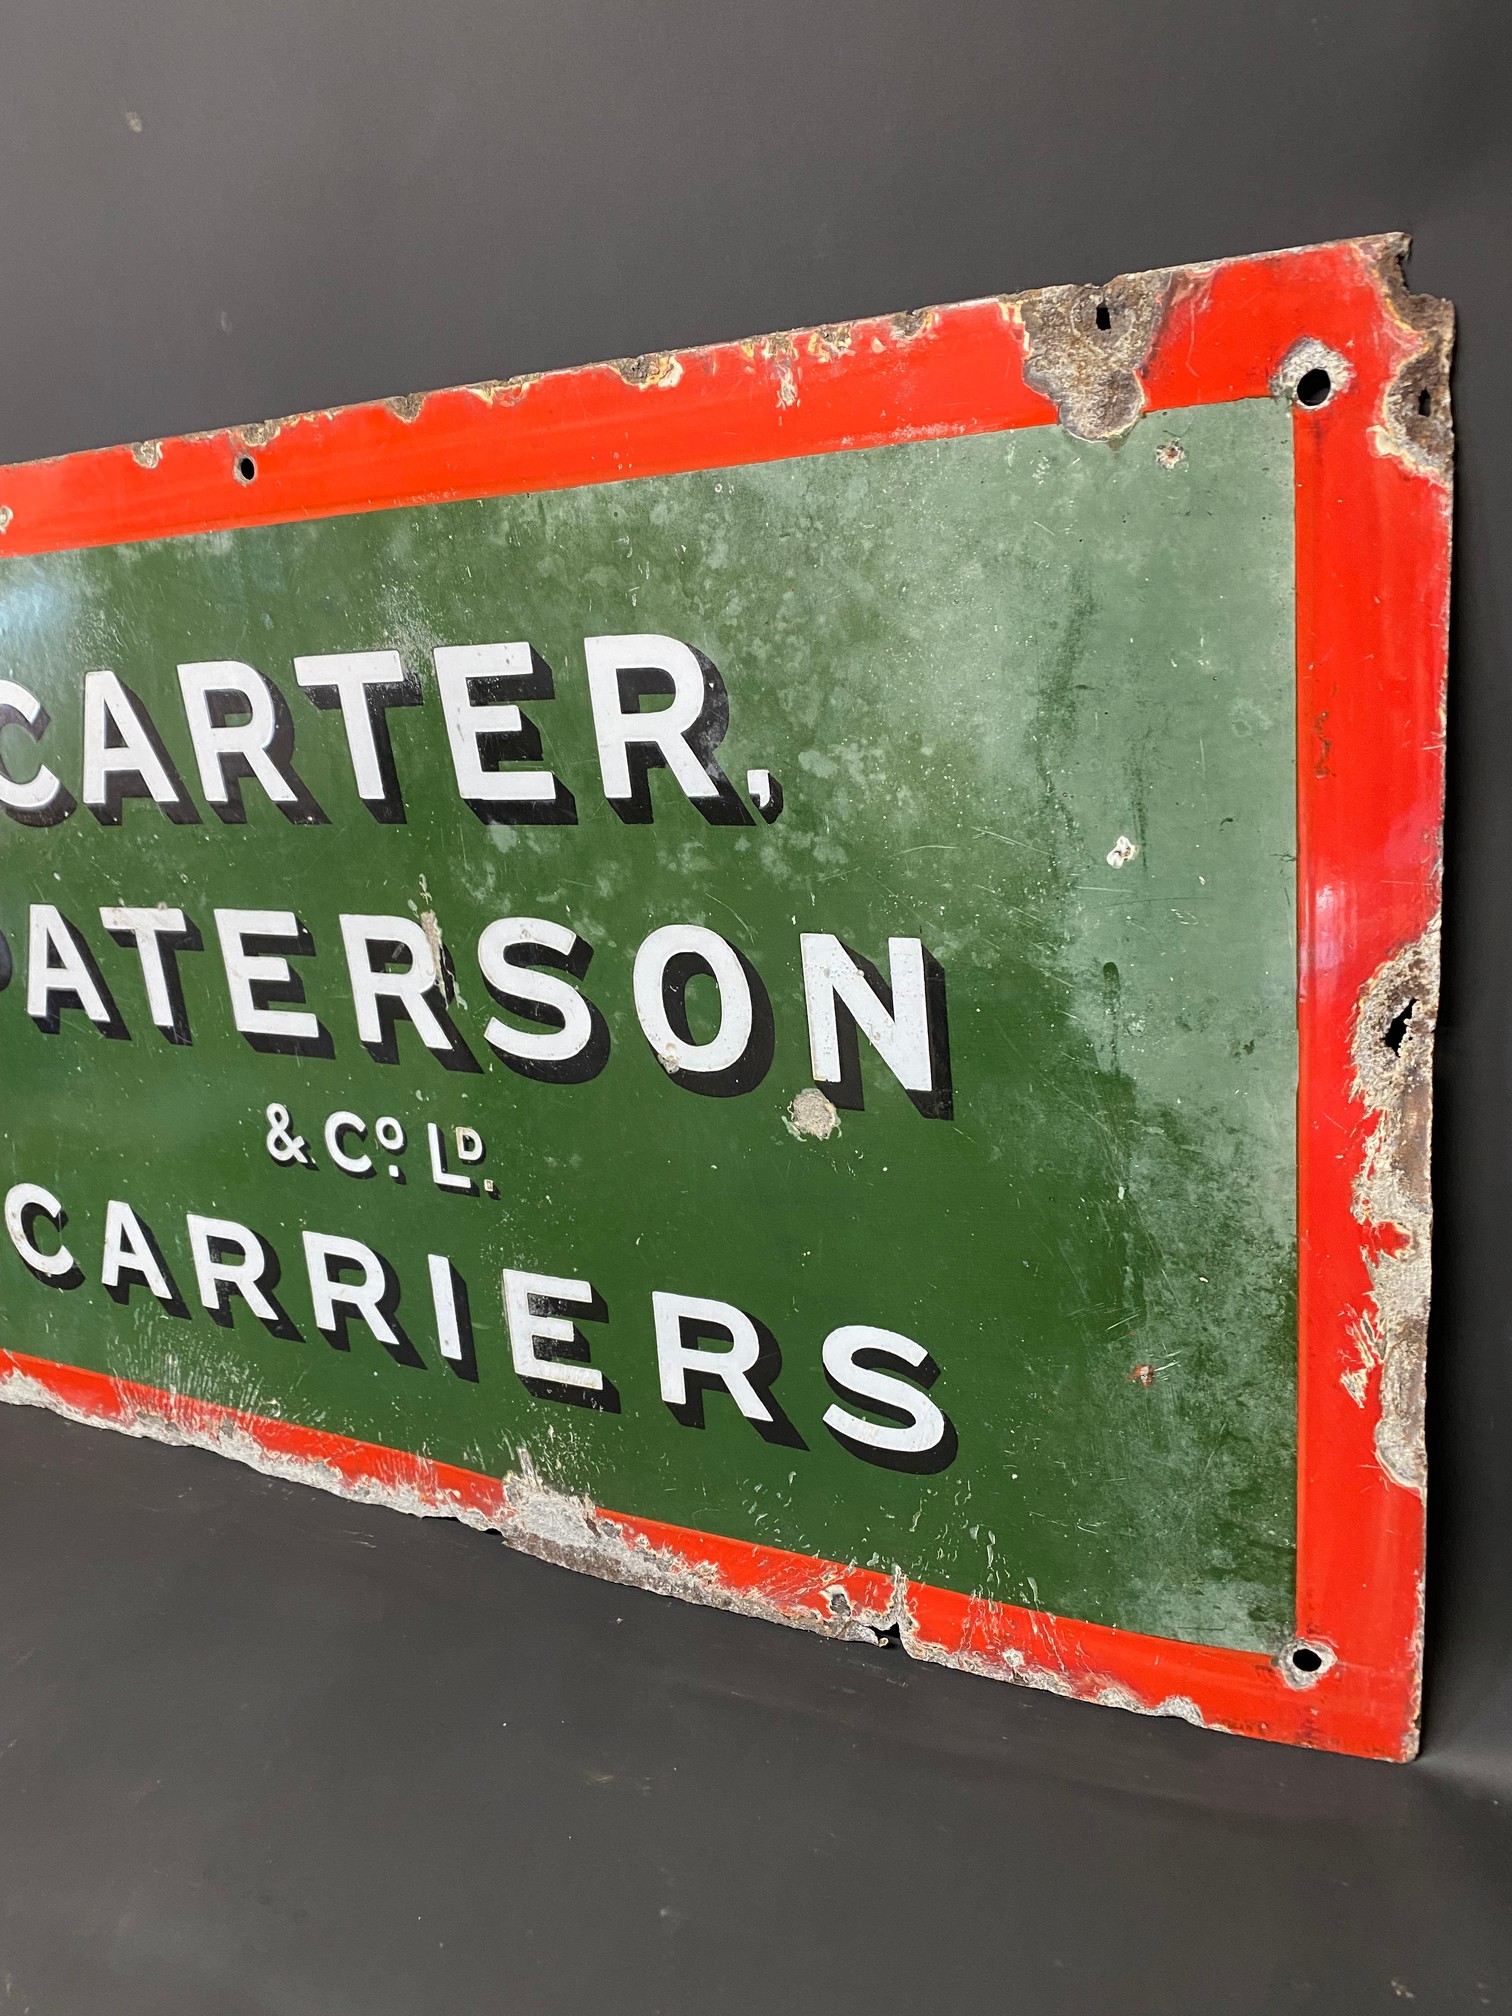 A Carter Paterson & Co. Ld. Carriers rectangular enamel sign, 31 1/2 x 17 3/4". - Image 2 of 3